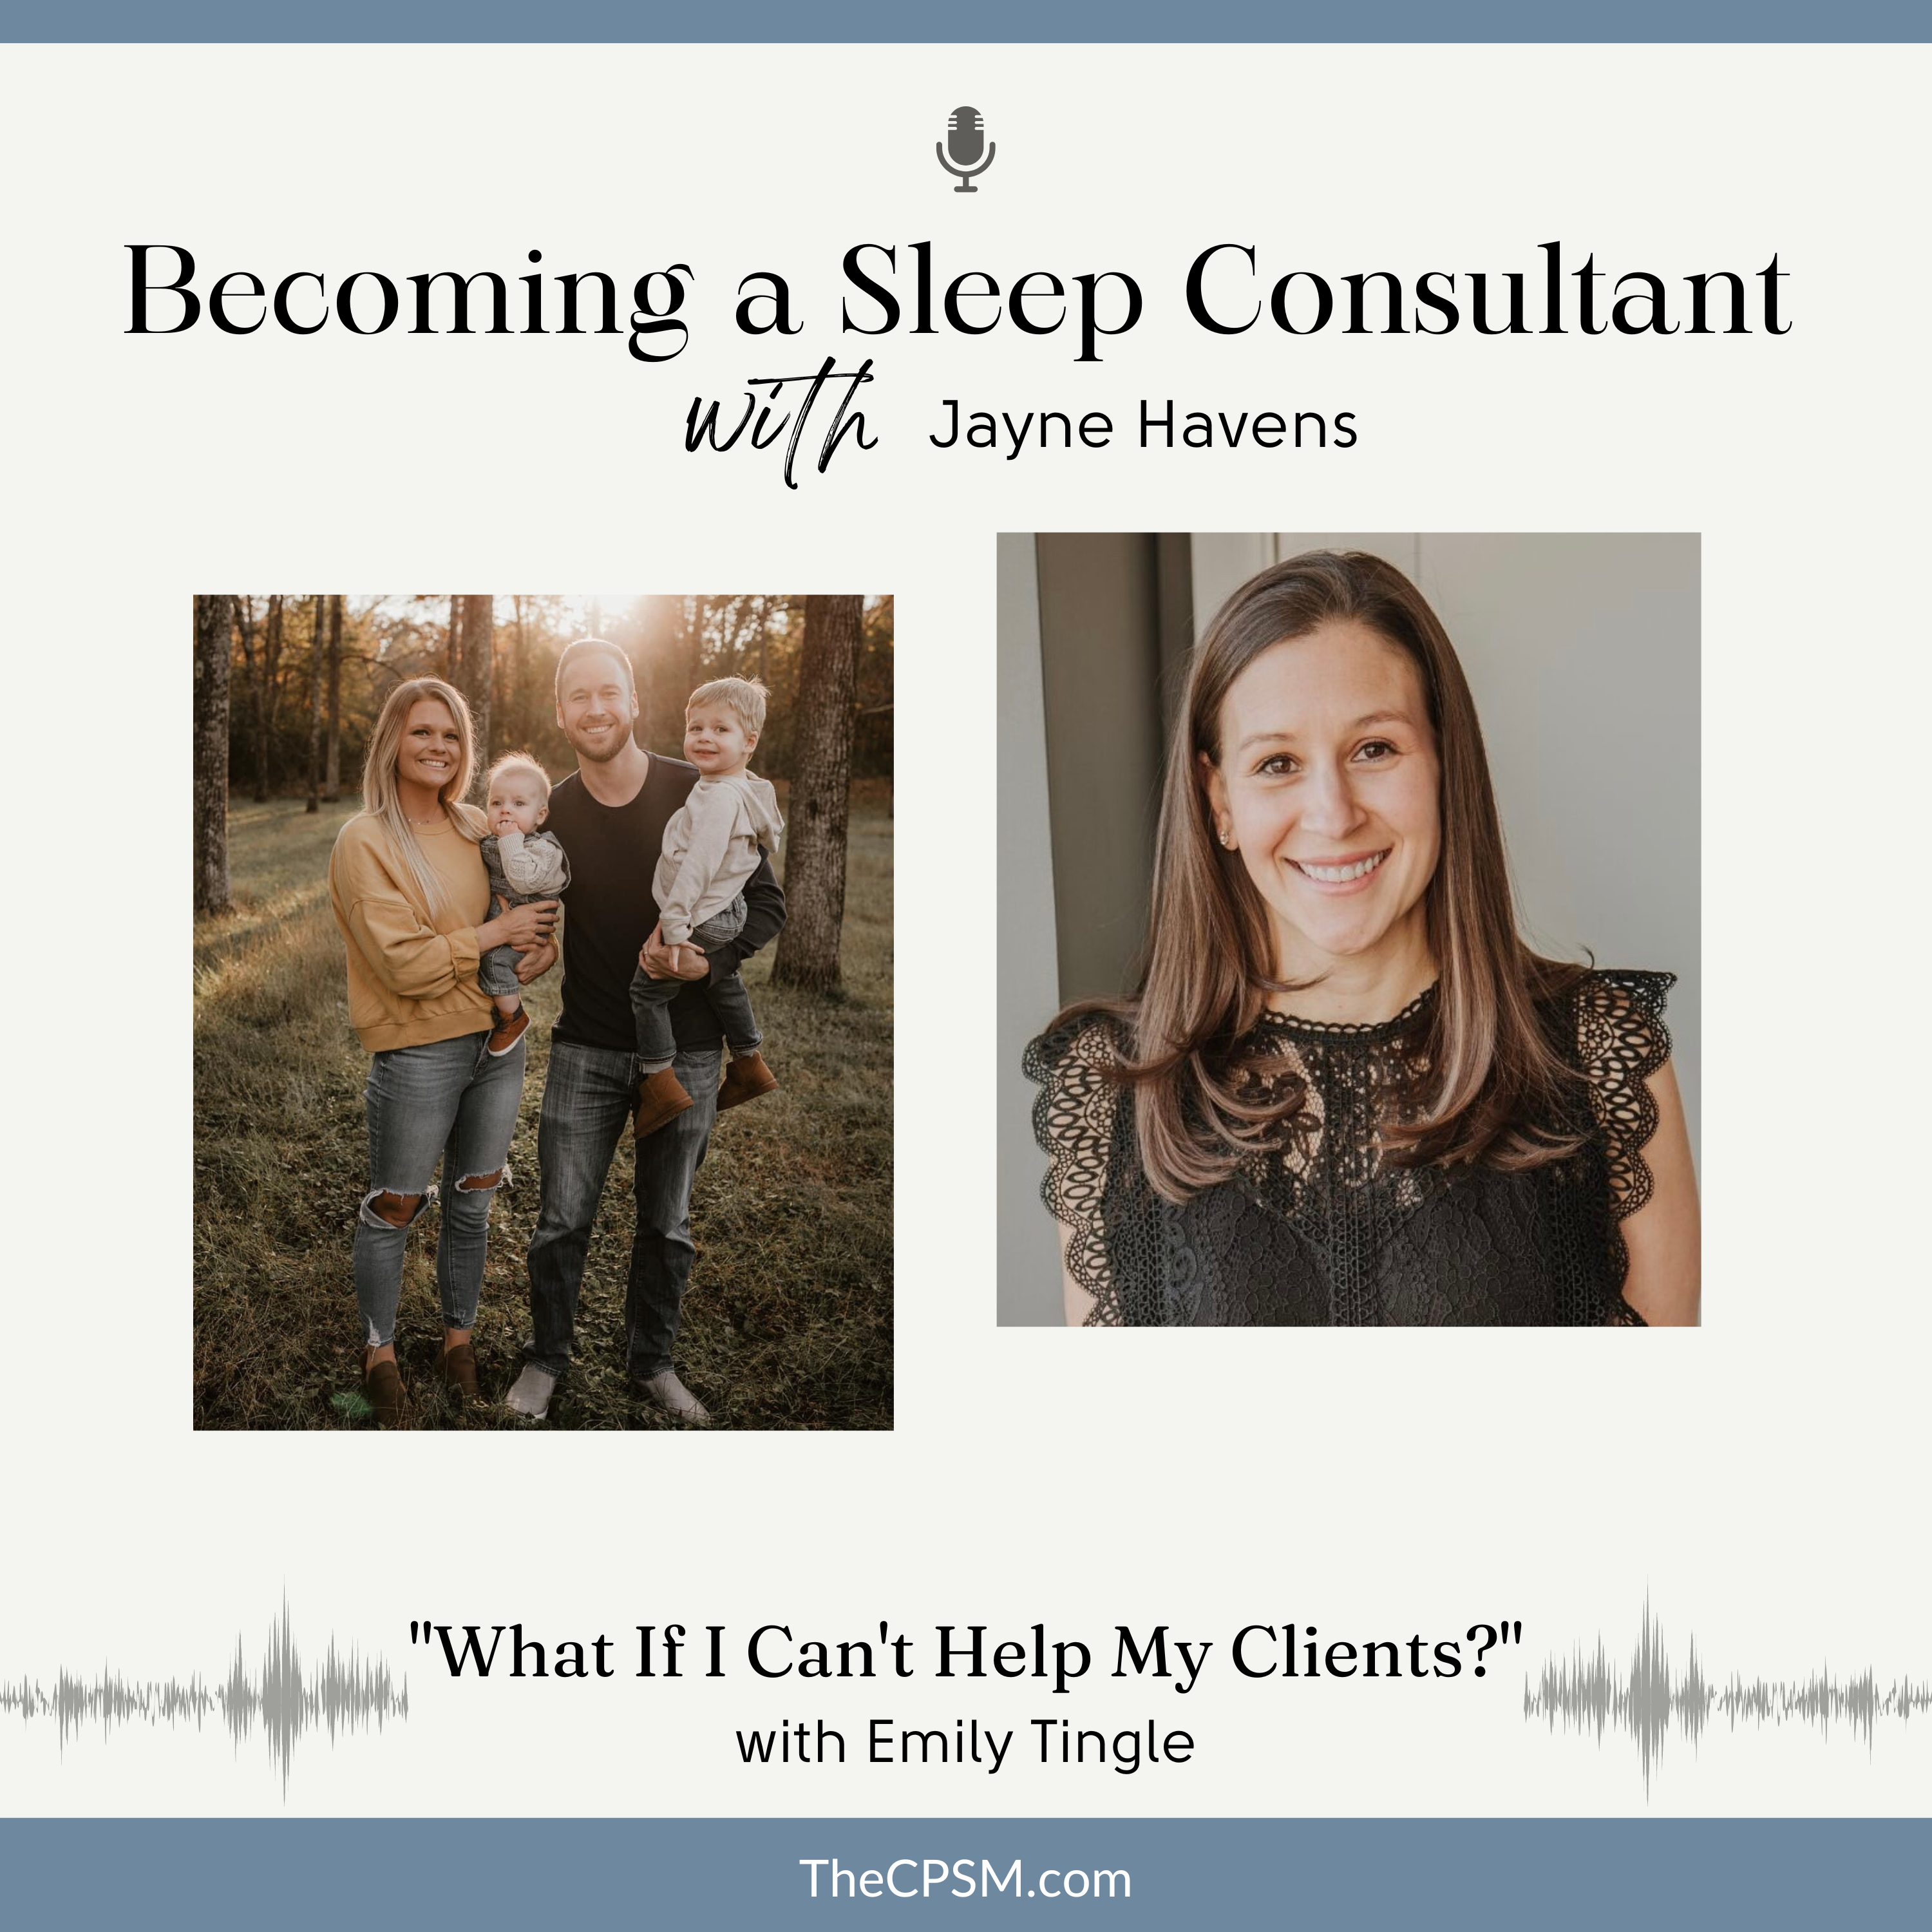 "What If I Won't Be Able To Help My Clients?" with Emily Tingle